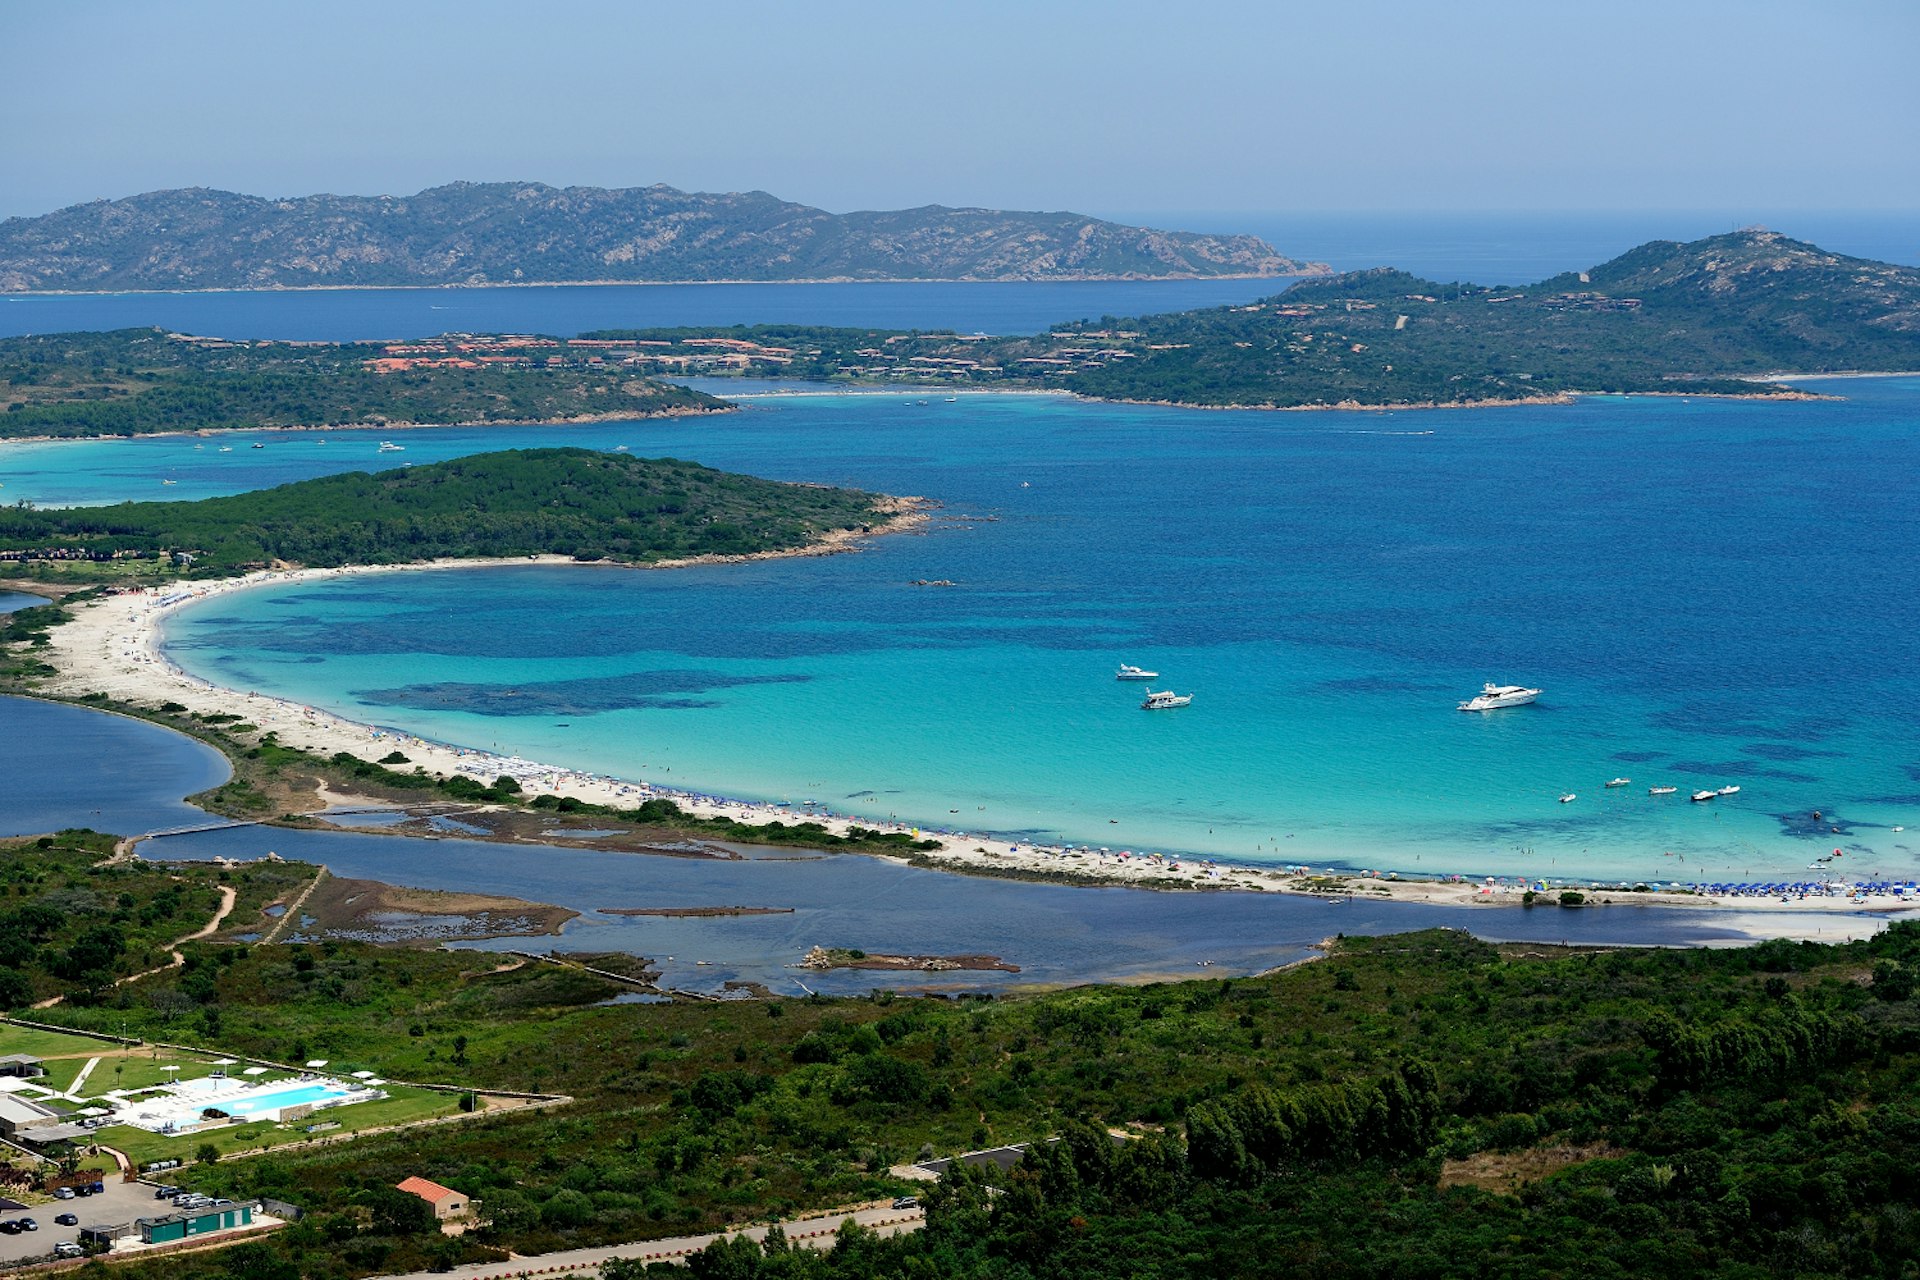 Landscape view of the expansive blue waters of Cala Brandinchi, Sardinia. 